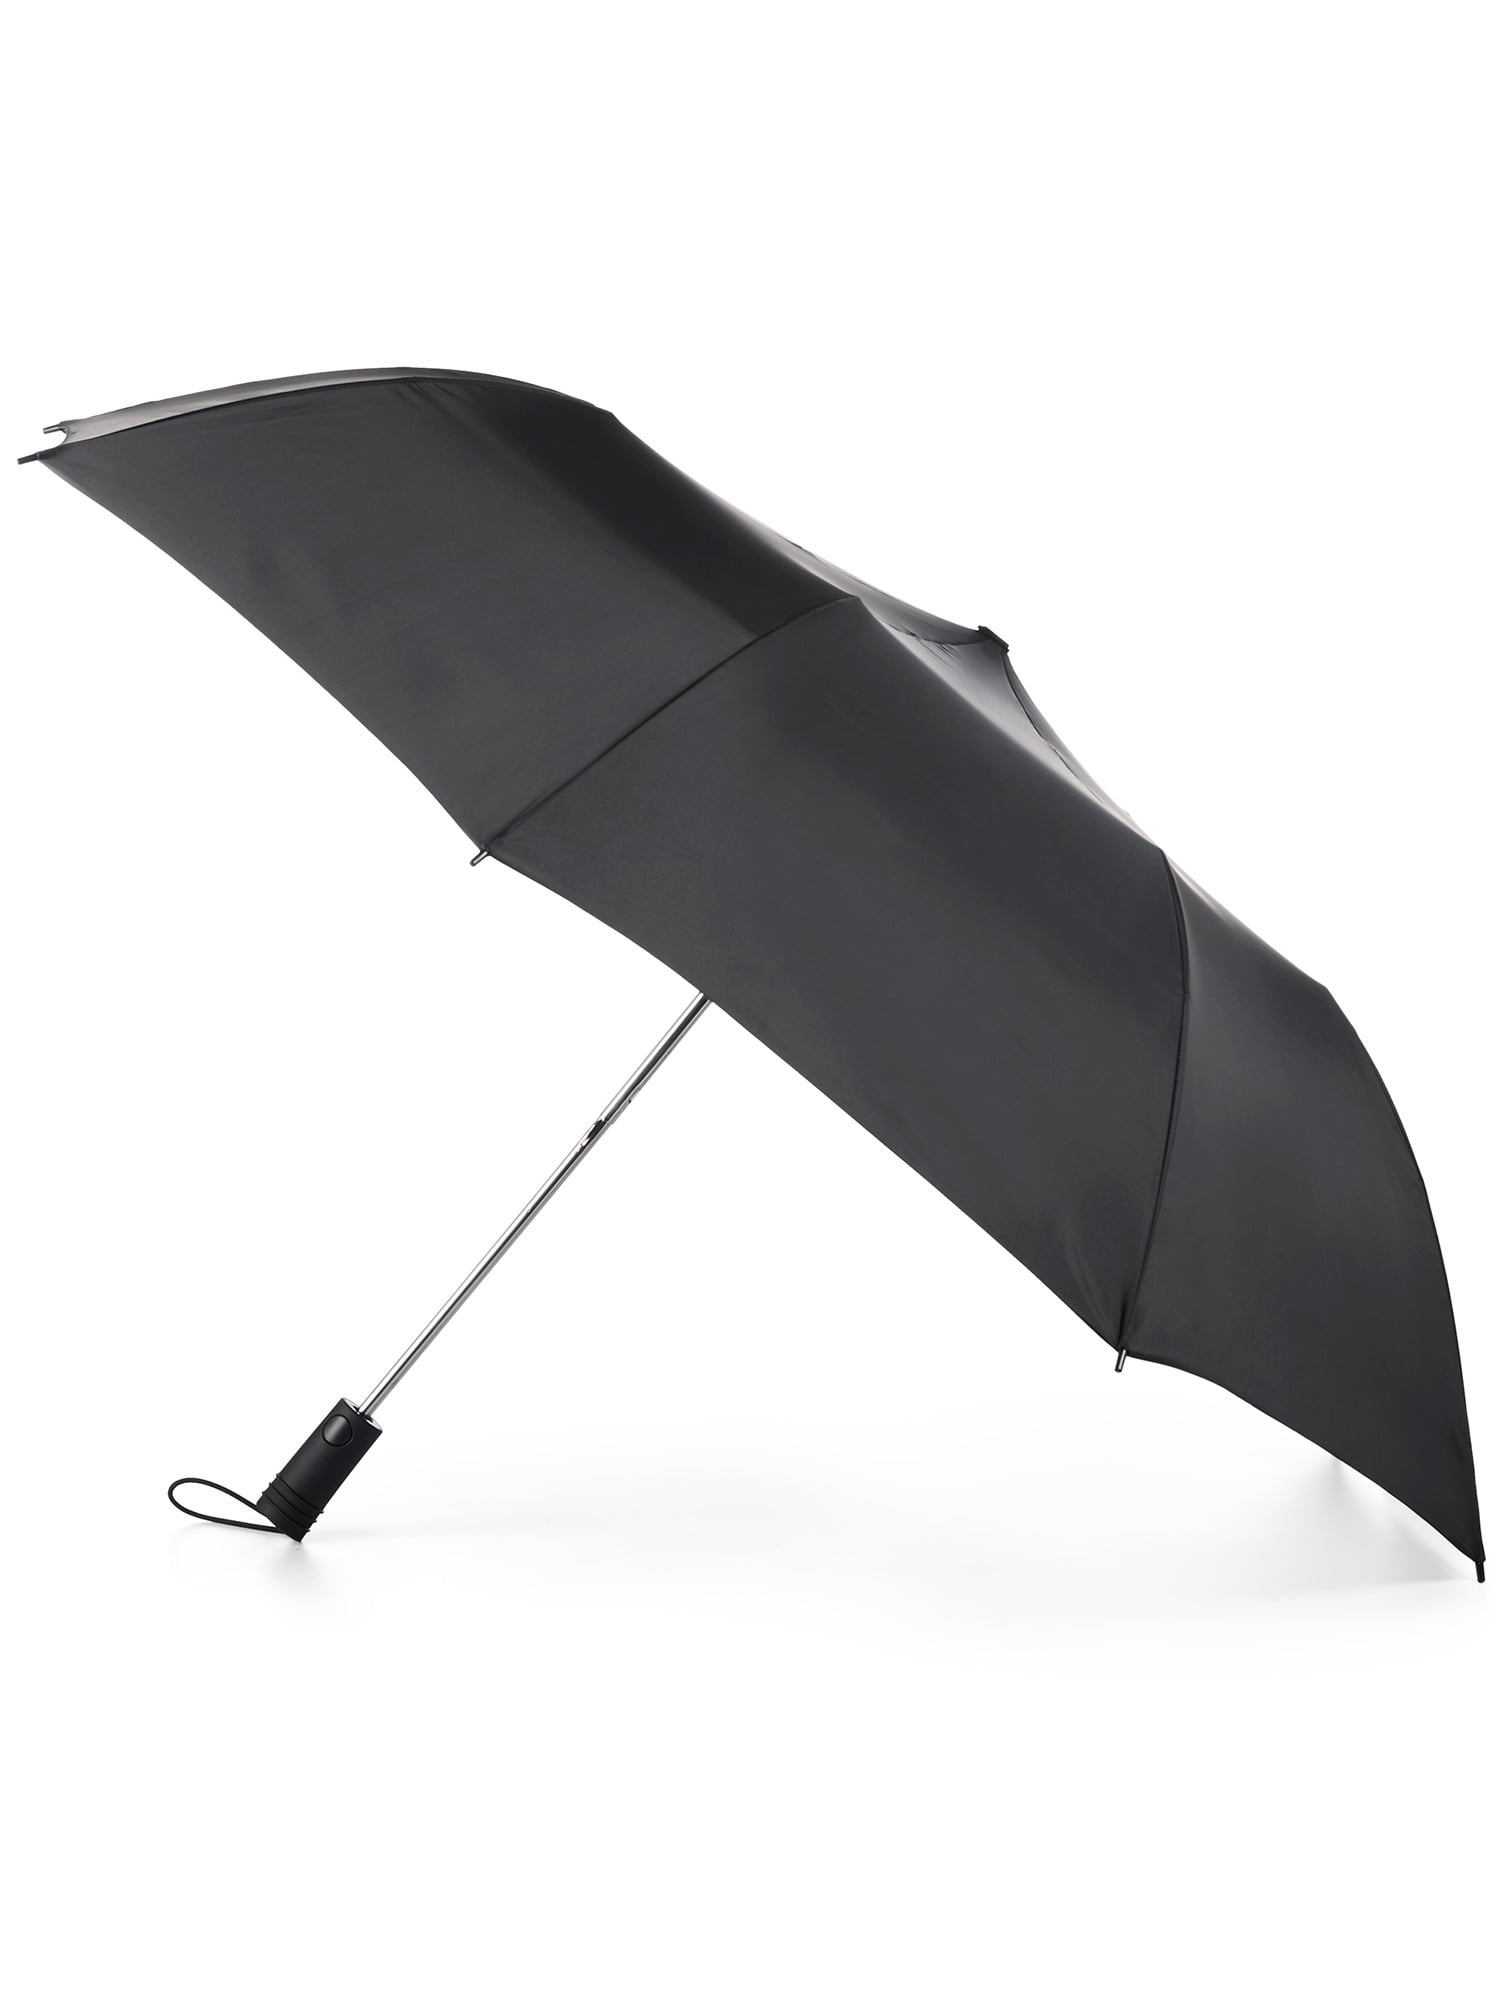 Totes One-touch Auto Open Close Golf Umbrella with NeverWet